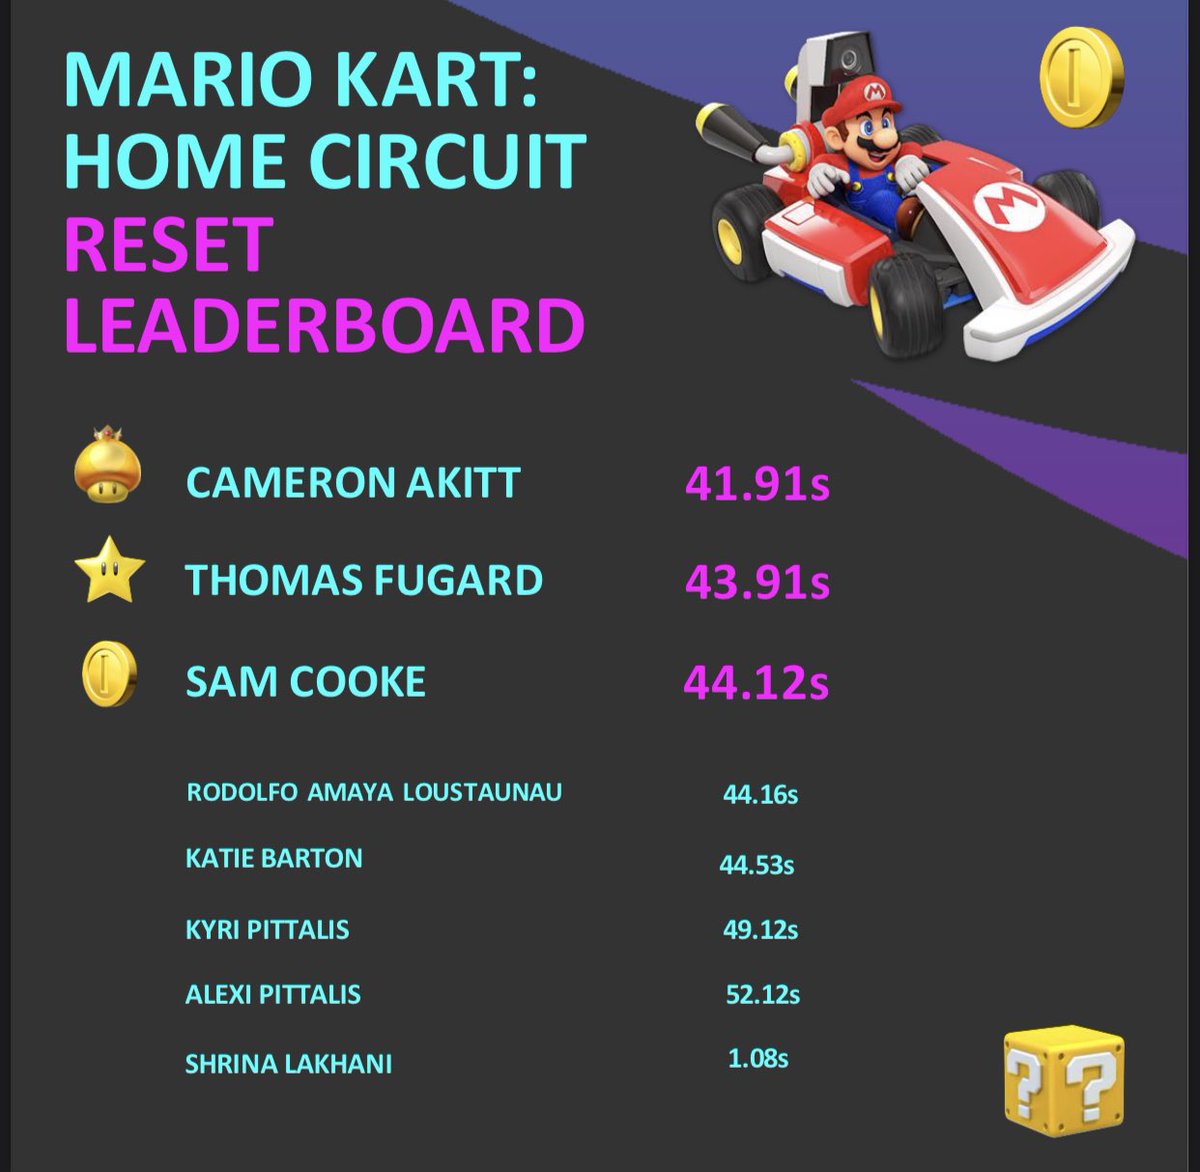 Over the last few months we've challenged clients and friends to race at our AR Office Track in Mario Kart Home Circuit. Those who have played will know it's not as easy as it sounds! Think you can beat their times? Visit Reset HQ to come and take top spot.